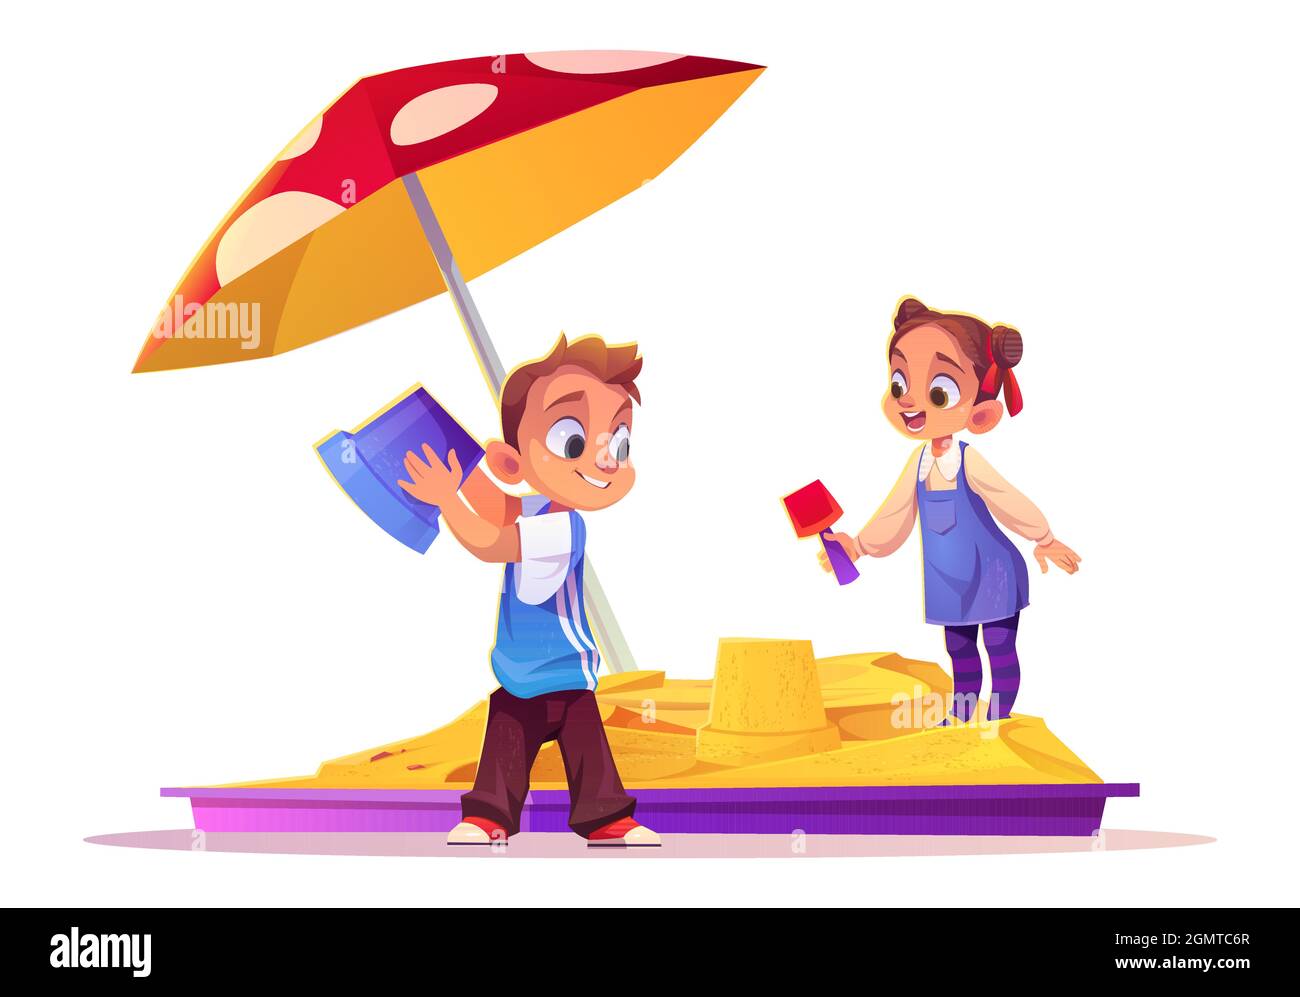 Children playing in sand box, little boy and girl building castle in sandbox using bucket and shovel toys. Kids outdoor fun, summer recreation, leisure, activity isolated, Cartoon vector illustration Stock Vector